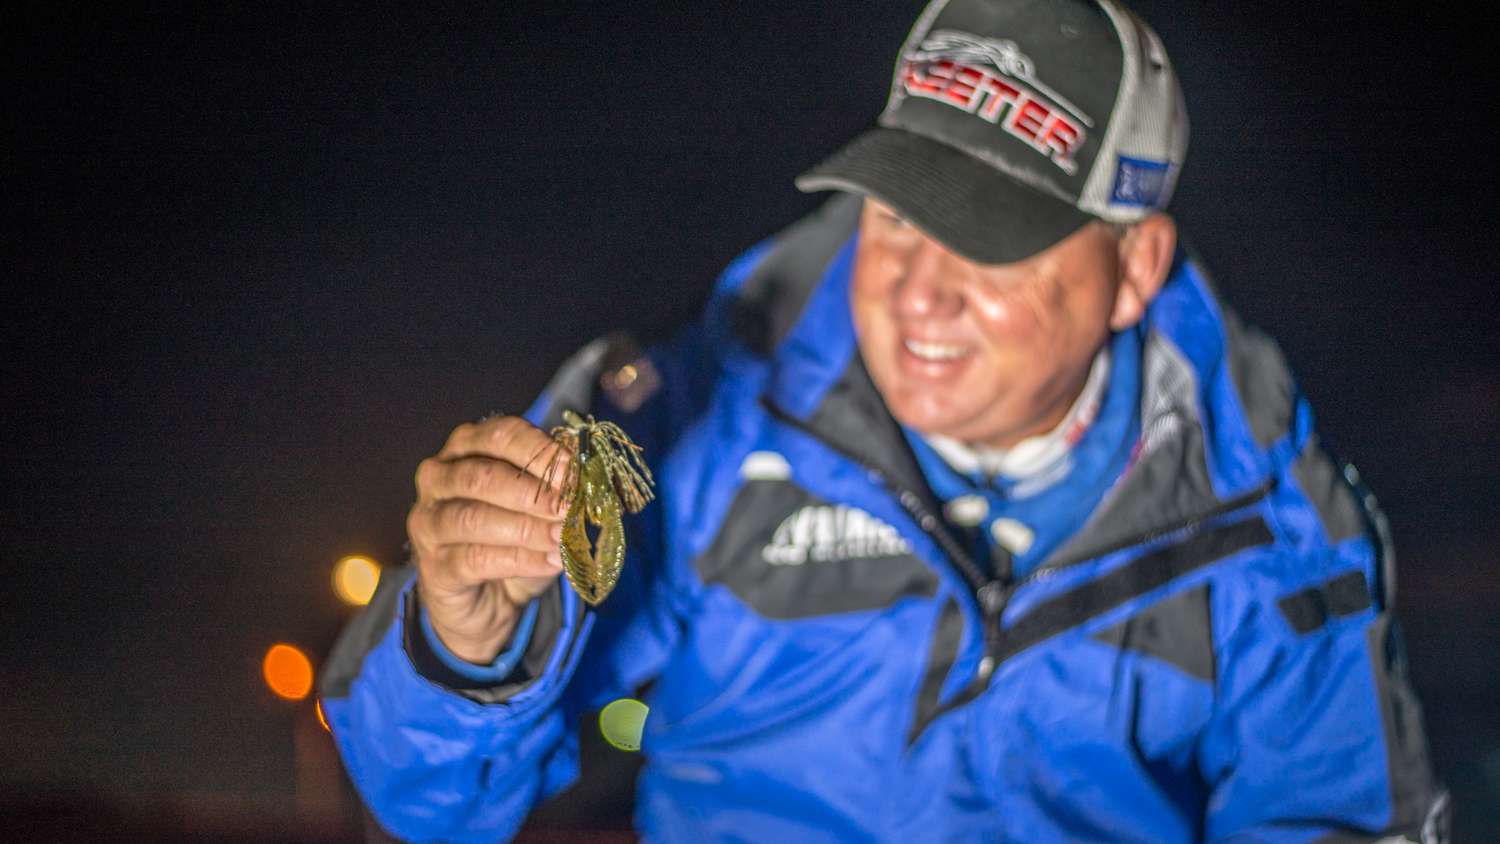 To give the bass a fresh look he rotated through three baits. âThe key for me was switching up baits every 15 minutes or so to keep the bite going,â he said. The choices were a 6-inch Texas-rigged YUM Dinger and the brandâs Christie Critter creature bait. He chose a 3/0 hook, 3/16-ounce weight and green pumpkin color for both baits. In the same color he used a 1/2-ounce BOOYAH Jig with 3.75-inch YUM Craw Chunk trailer. 